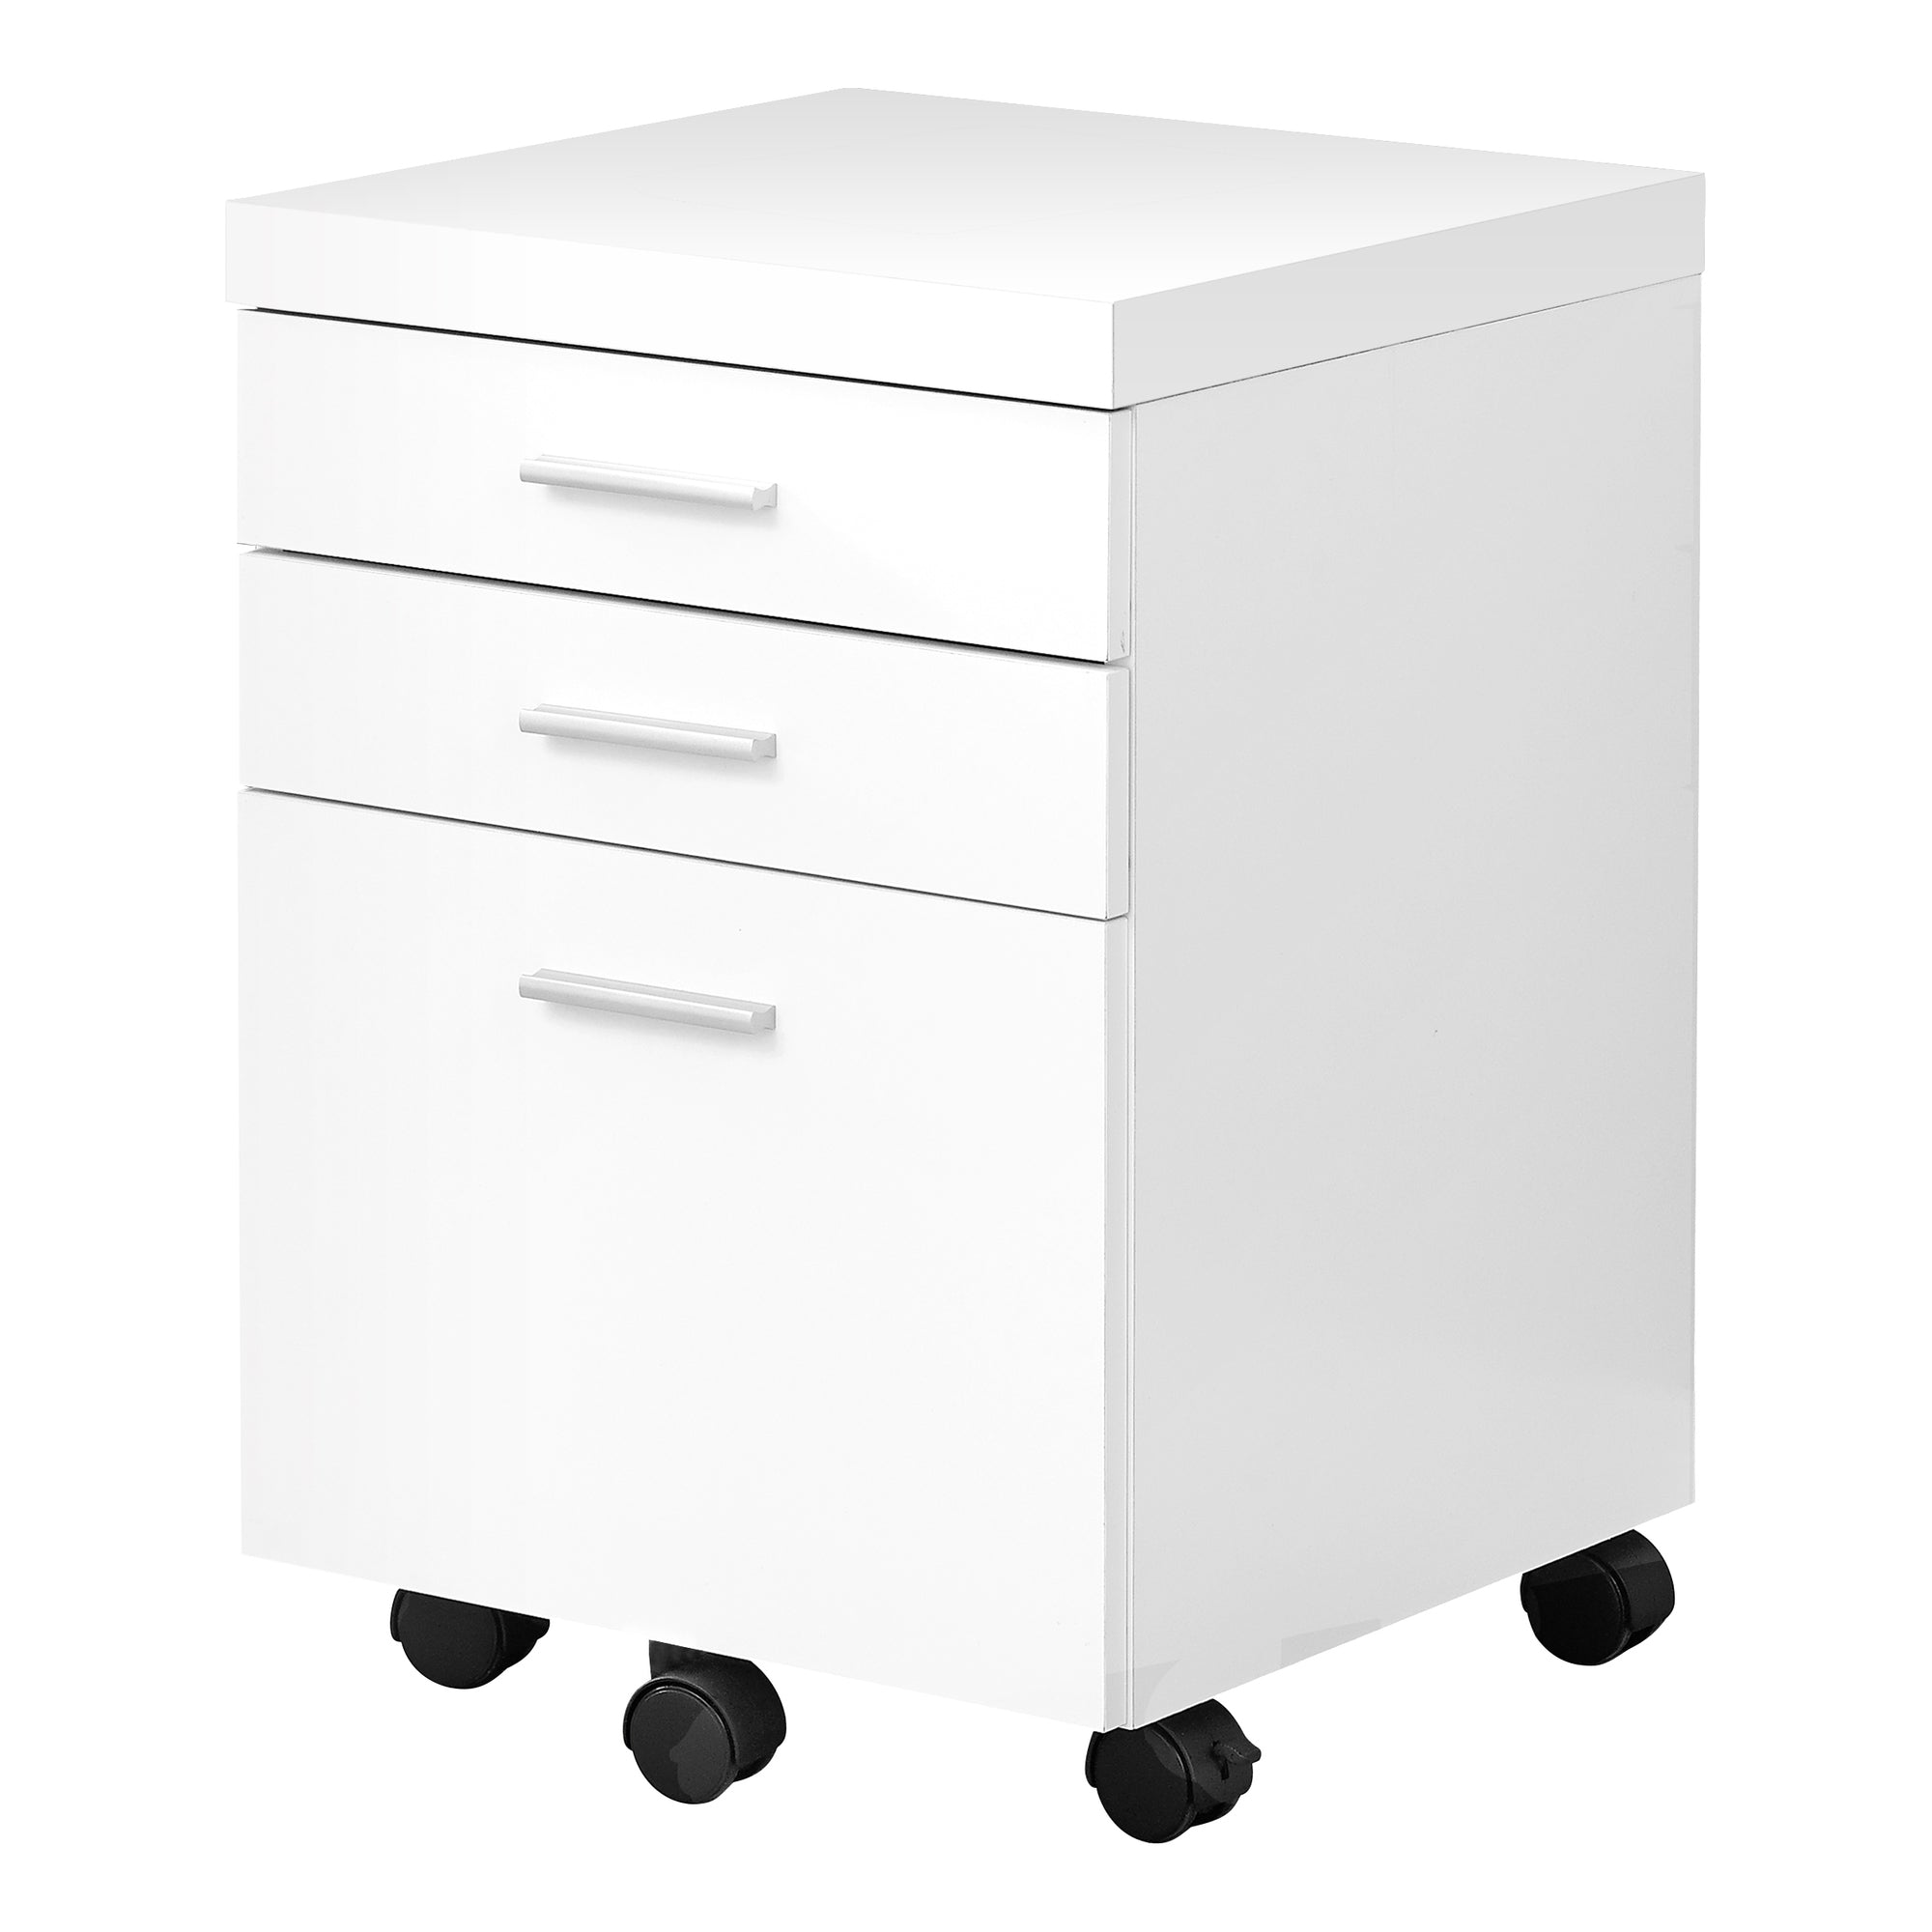 MN-827048    File Cabinet, Rolling Mobile, Storage, Printer Stand, Wood File Cabinet, Office, Mdf, White, Contemporary, Modern